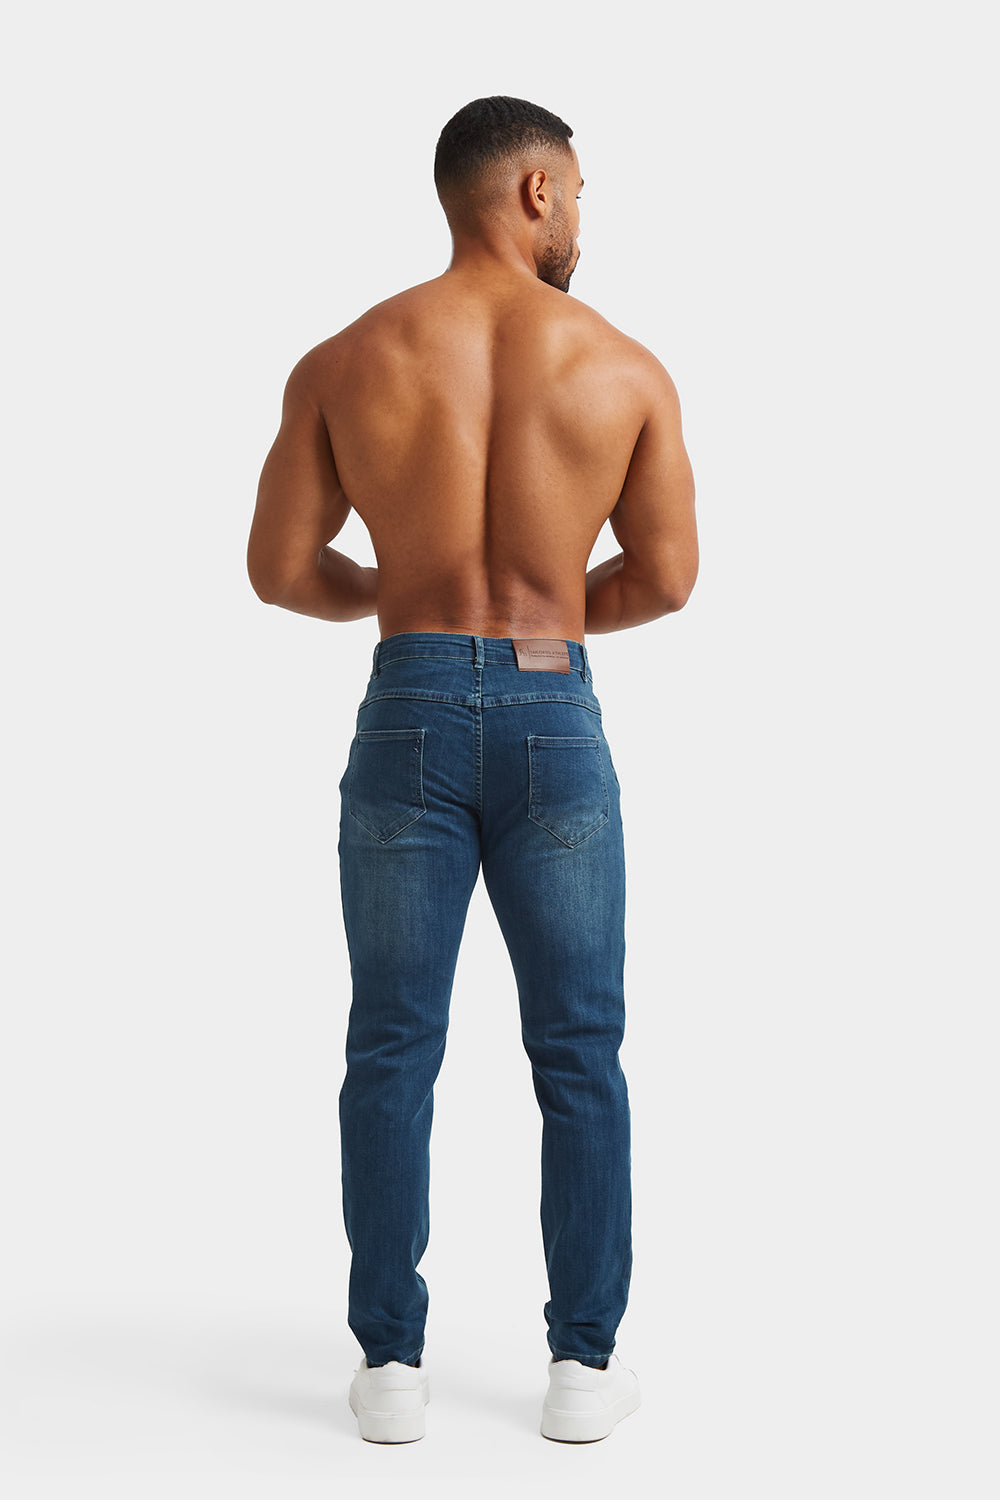 TAILORED ATHLETE in Athletic USA - Mid Fit Jeans - Blue